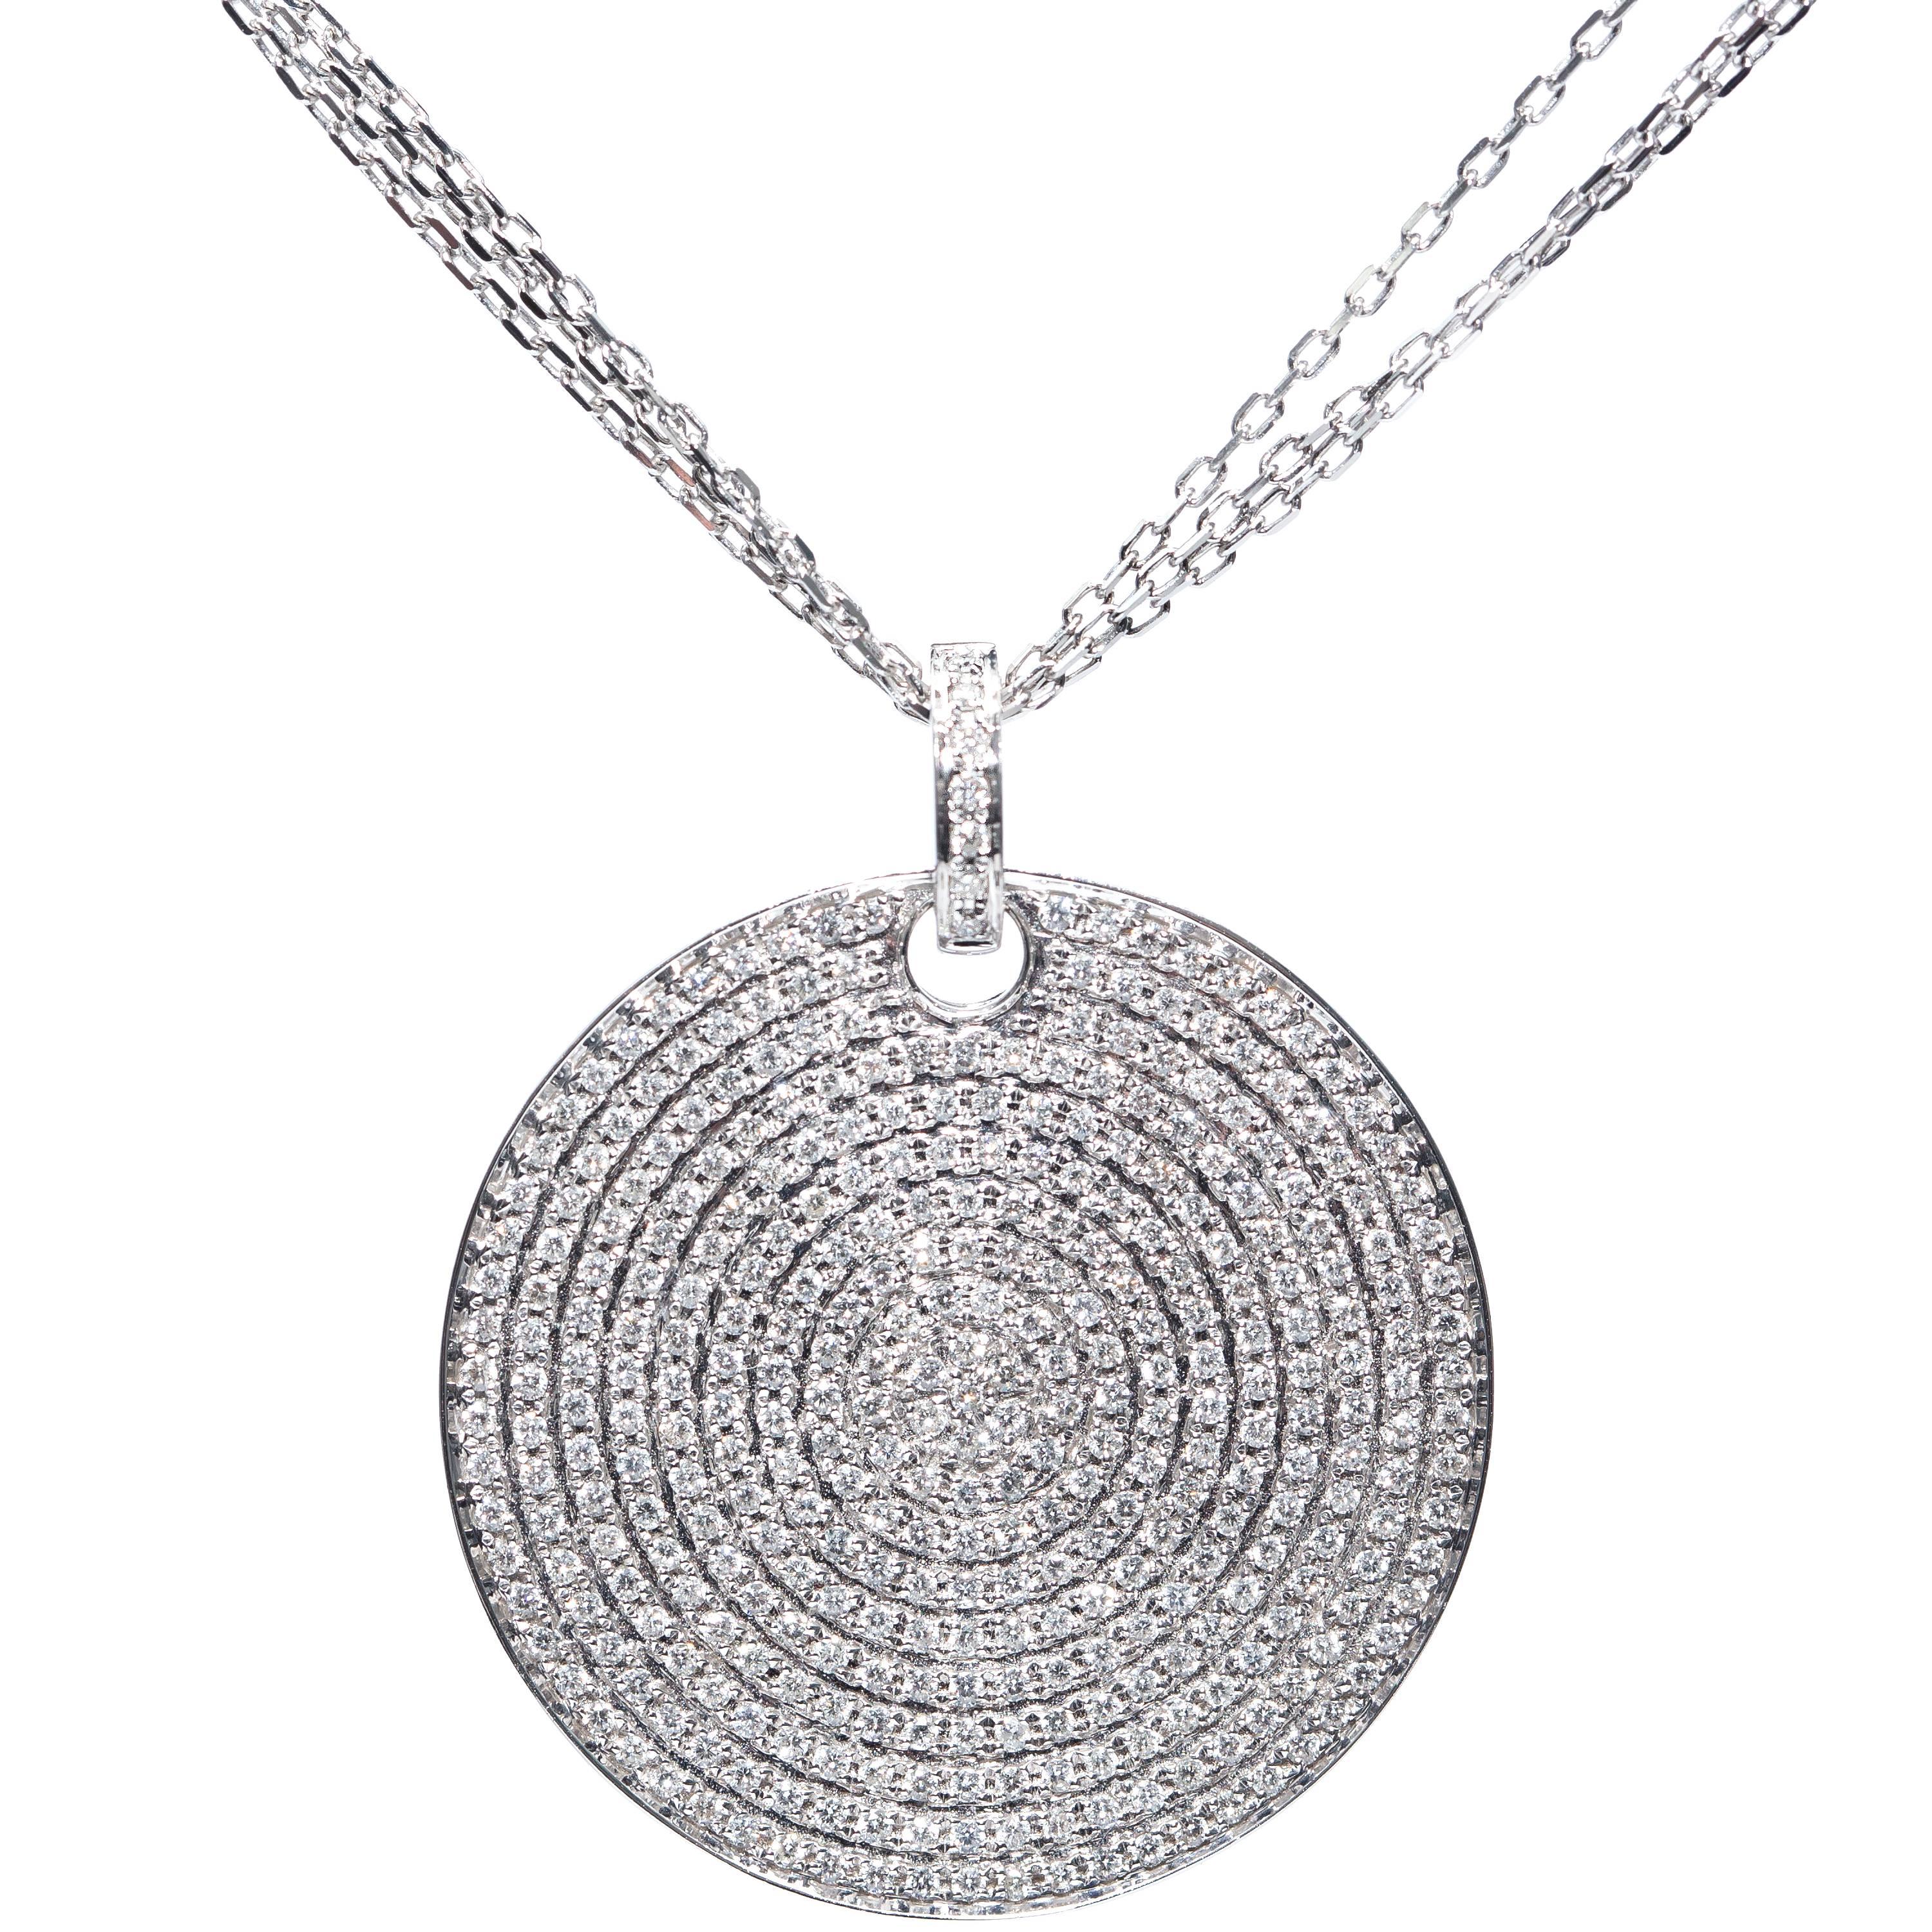 This Stunning 1.50 Carat Disc Pendant is completely adorned in a beautiful Round Brilliant Cut Diamonds. Crafted with care this show stopping Diamond Pendant is connected to a three piece chain for a contemporary feel of the highest quality. It is